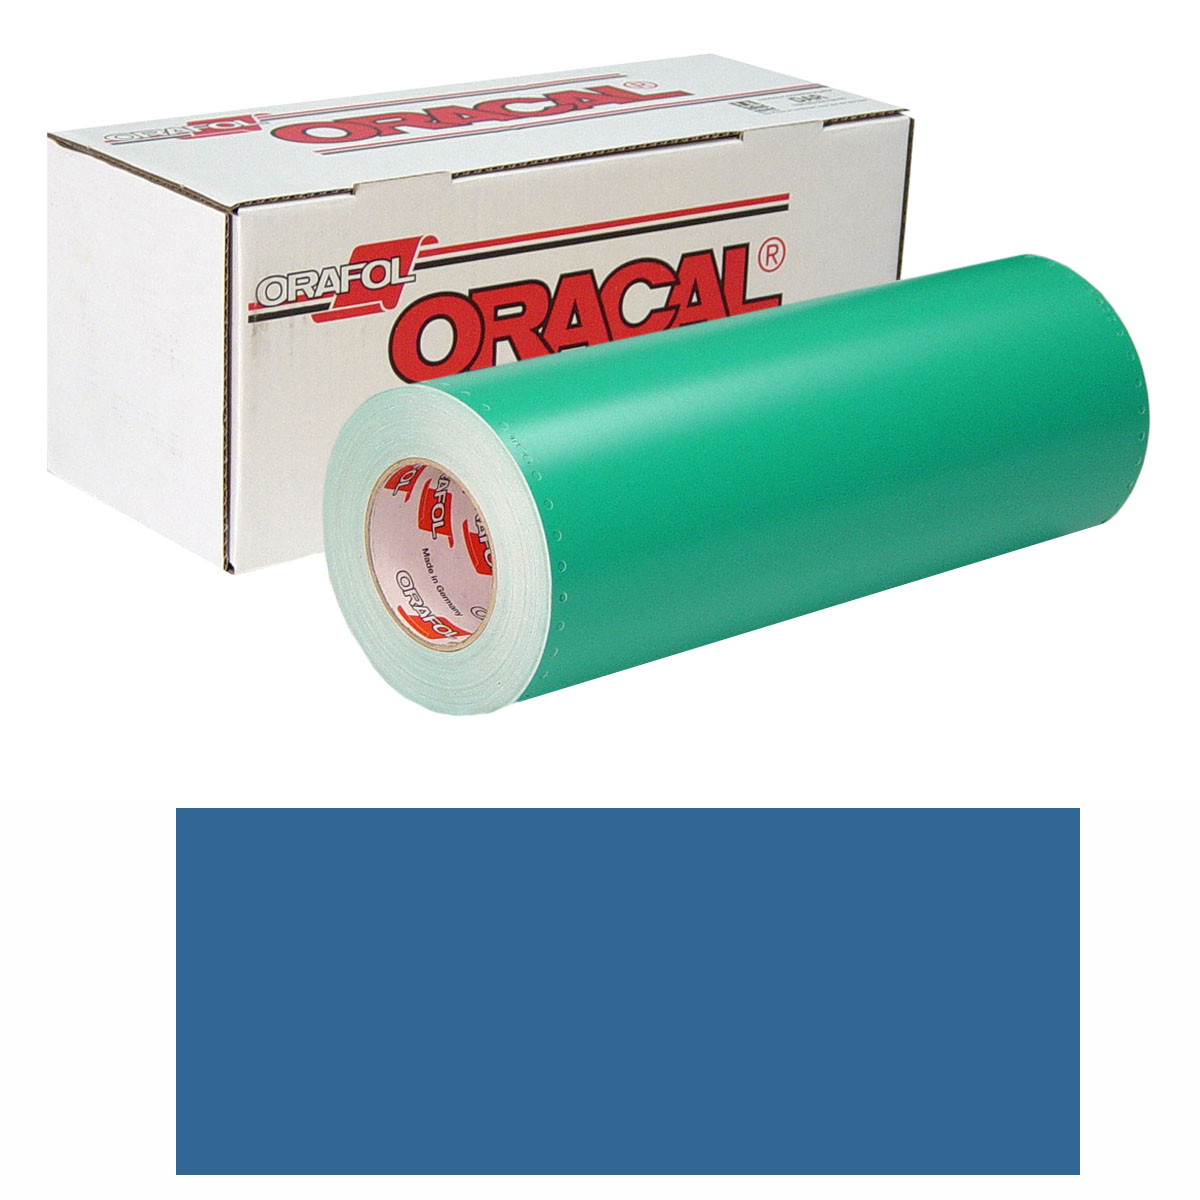 ORACAL 8500 15in X 10yd 066 Turquois Blue